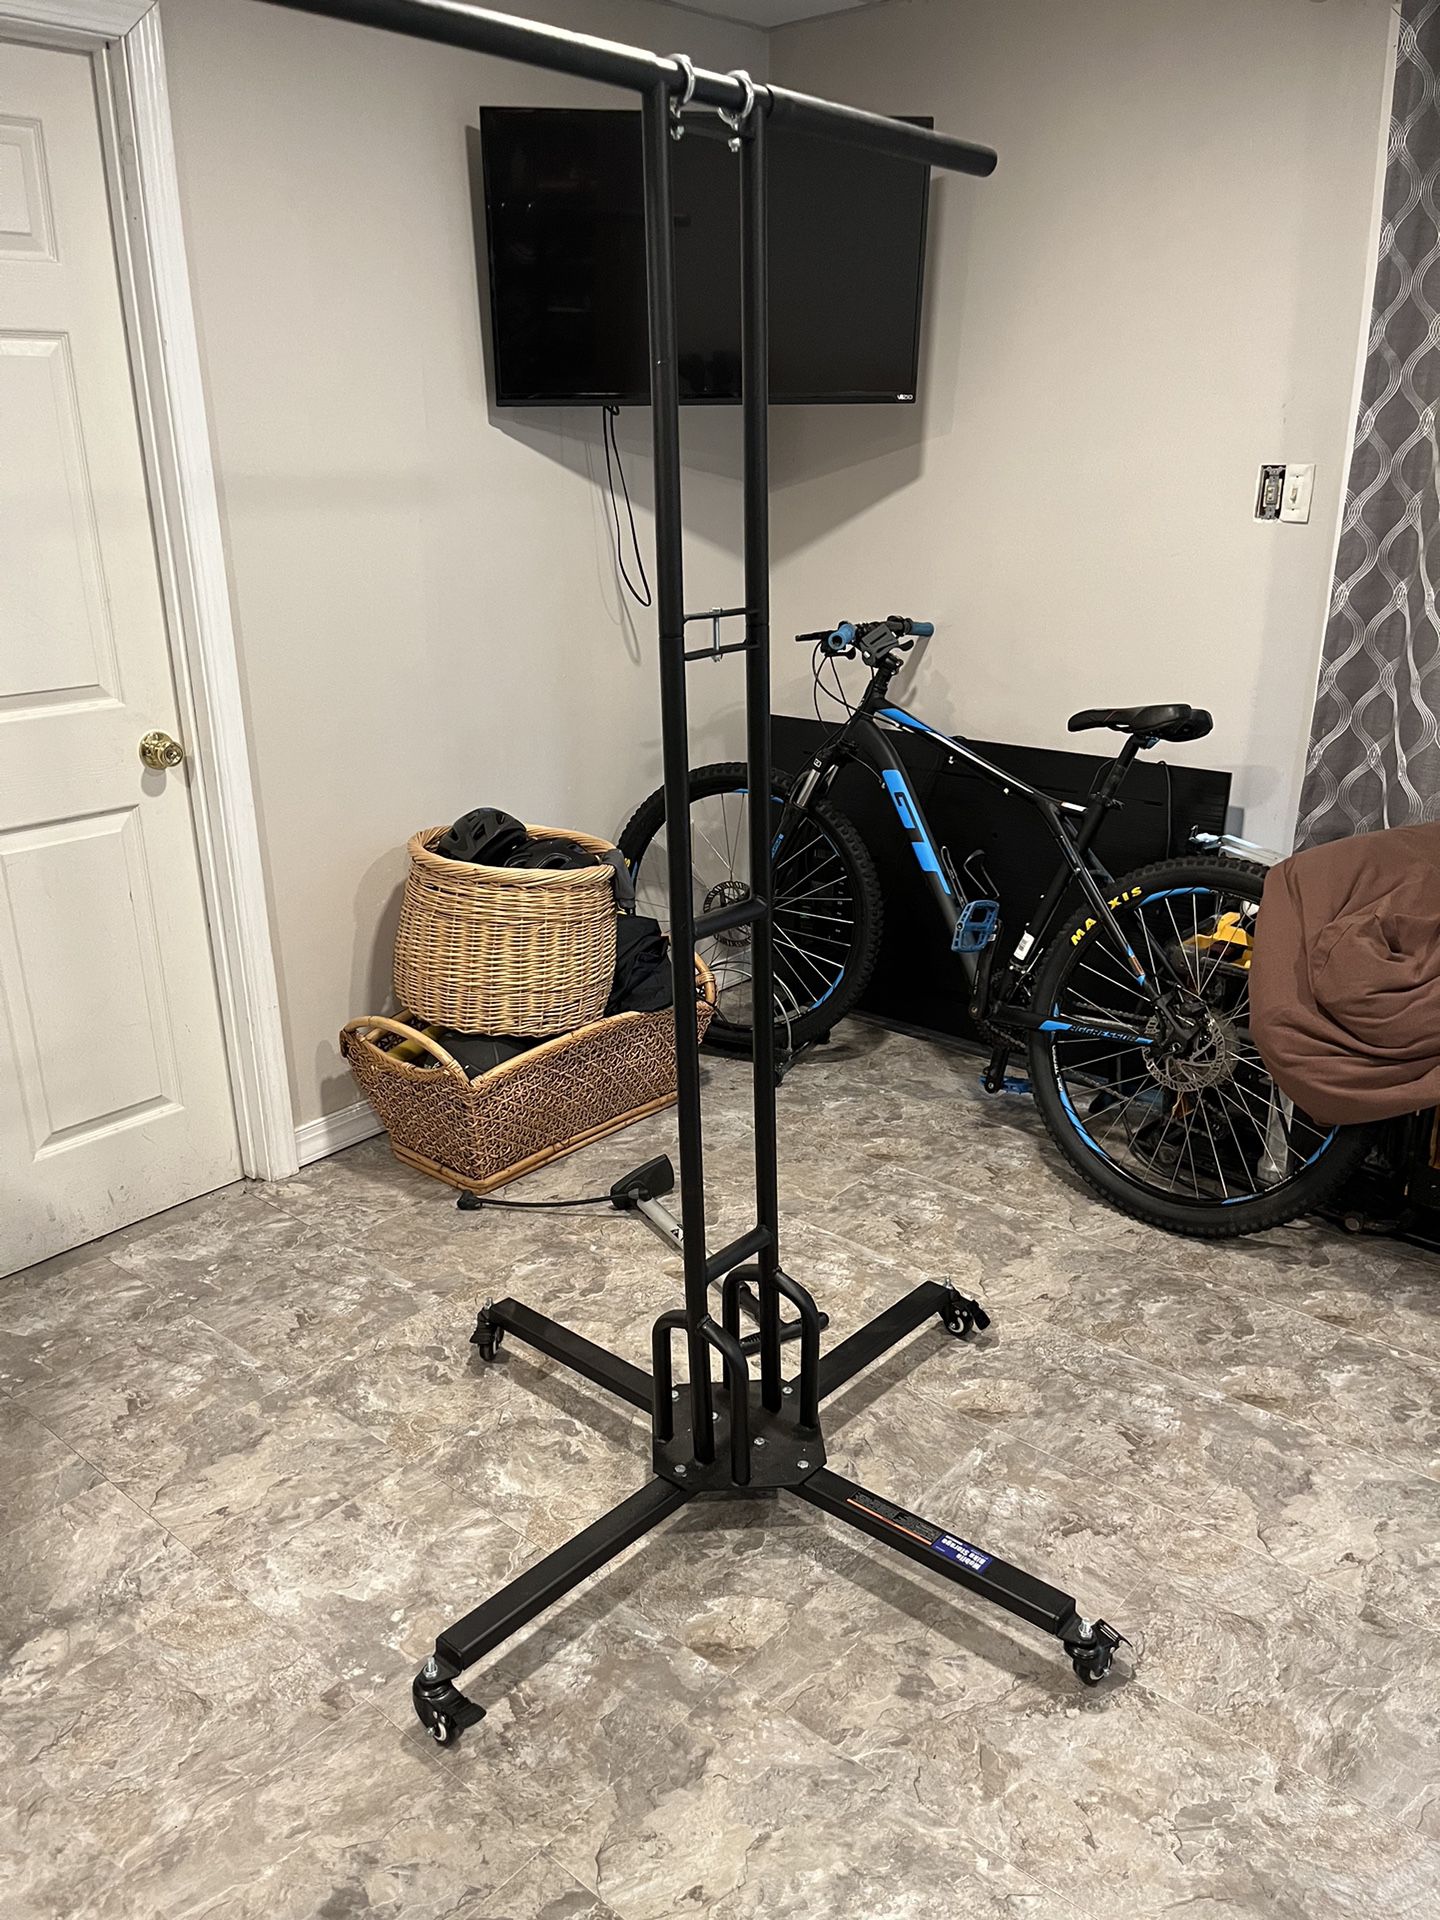 Movable bike rack stand on wheels